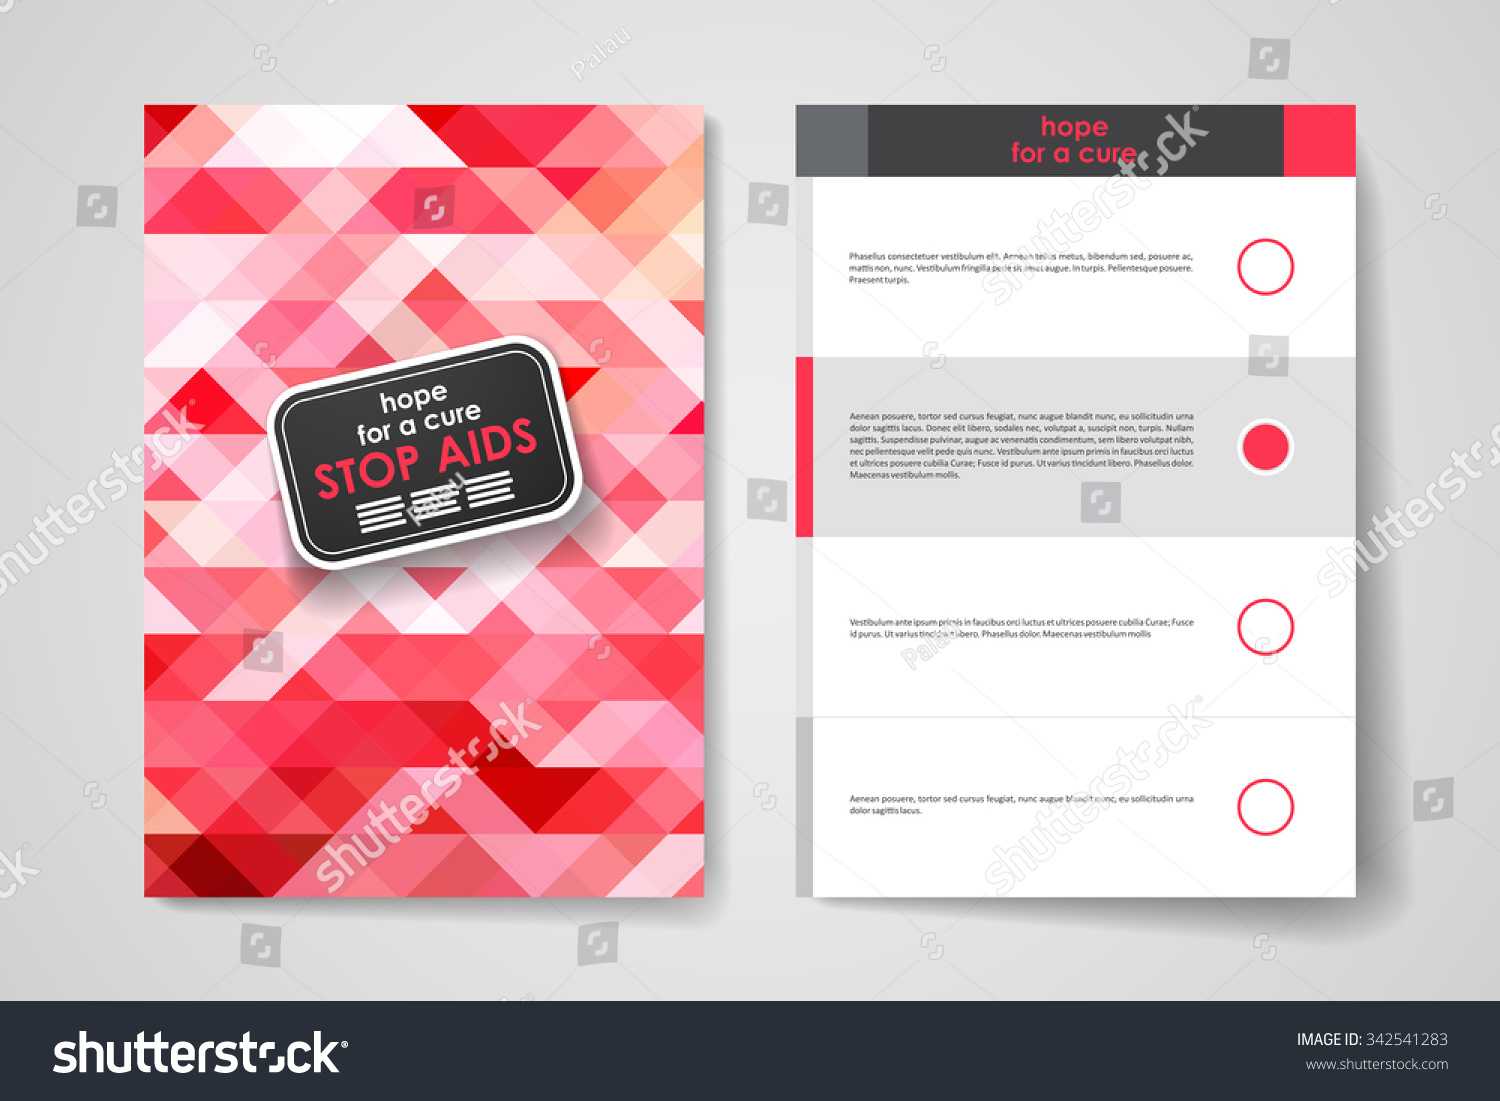 Set Brochure Poster Templates World Aids Stock Image In Hiv Aids Brochure Templates